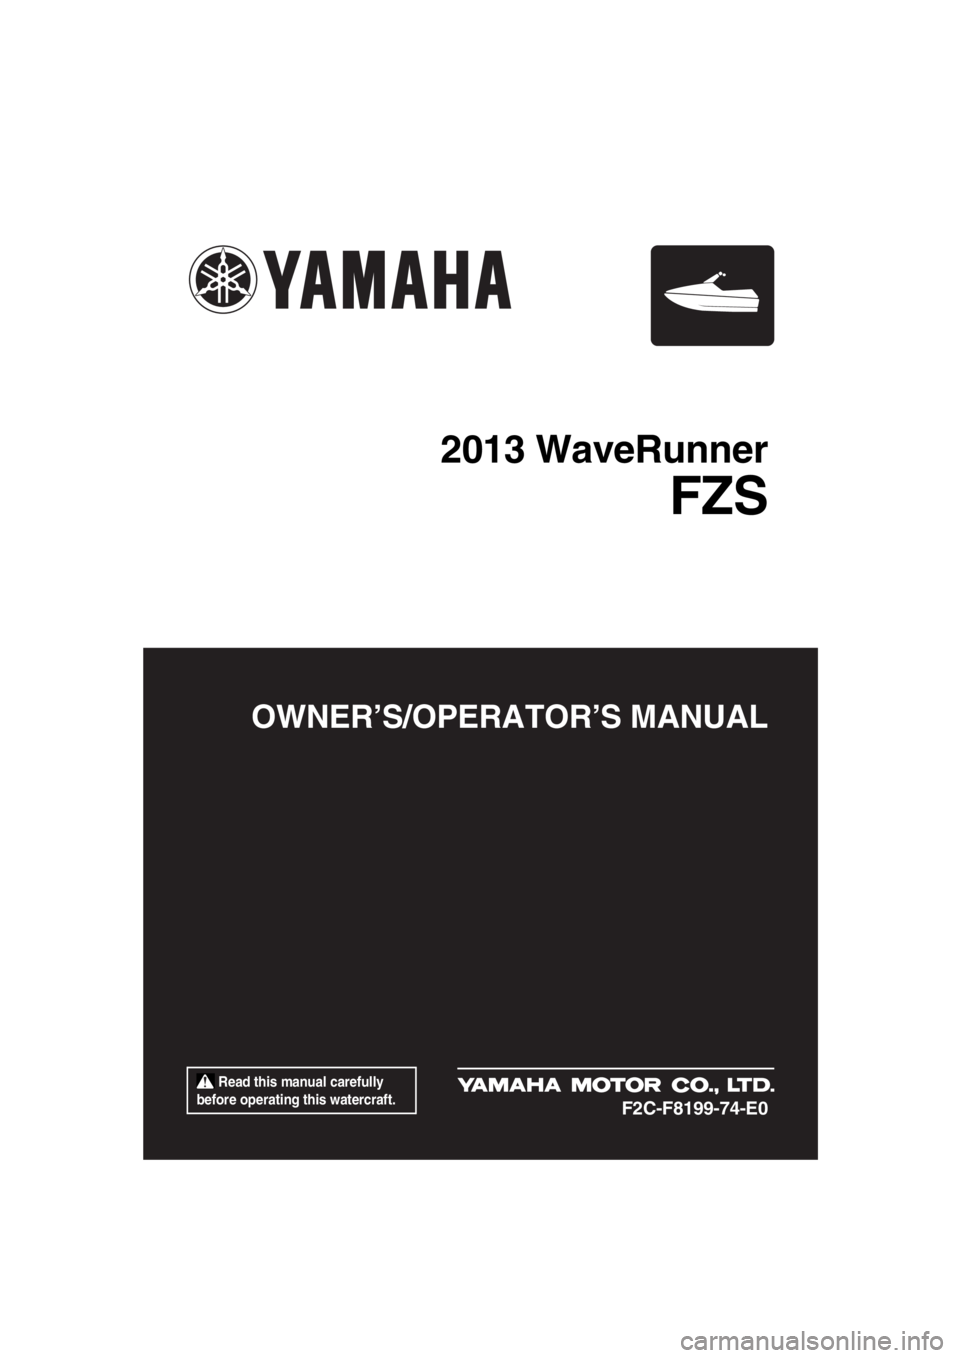 YAMAHA FZS SVHO 2013  Owners Manual  Read this manual carefully 
before operating this watercraft.
OWNER’S/OPERATOR’S MANUAL
2013 WaveRunner
FZS
F2C-F8199-74-E0
UF2C74E0.book  Page 1  Friday, August 3, 2012  2:34 PM 